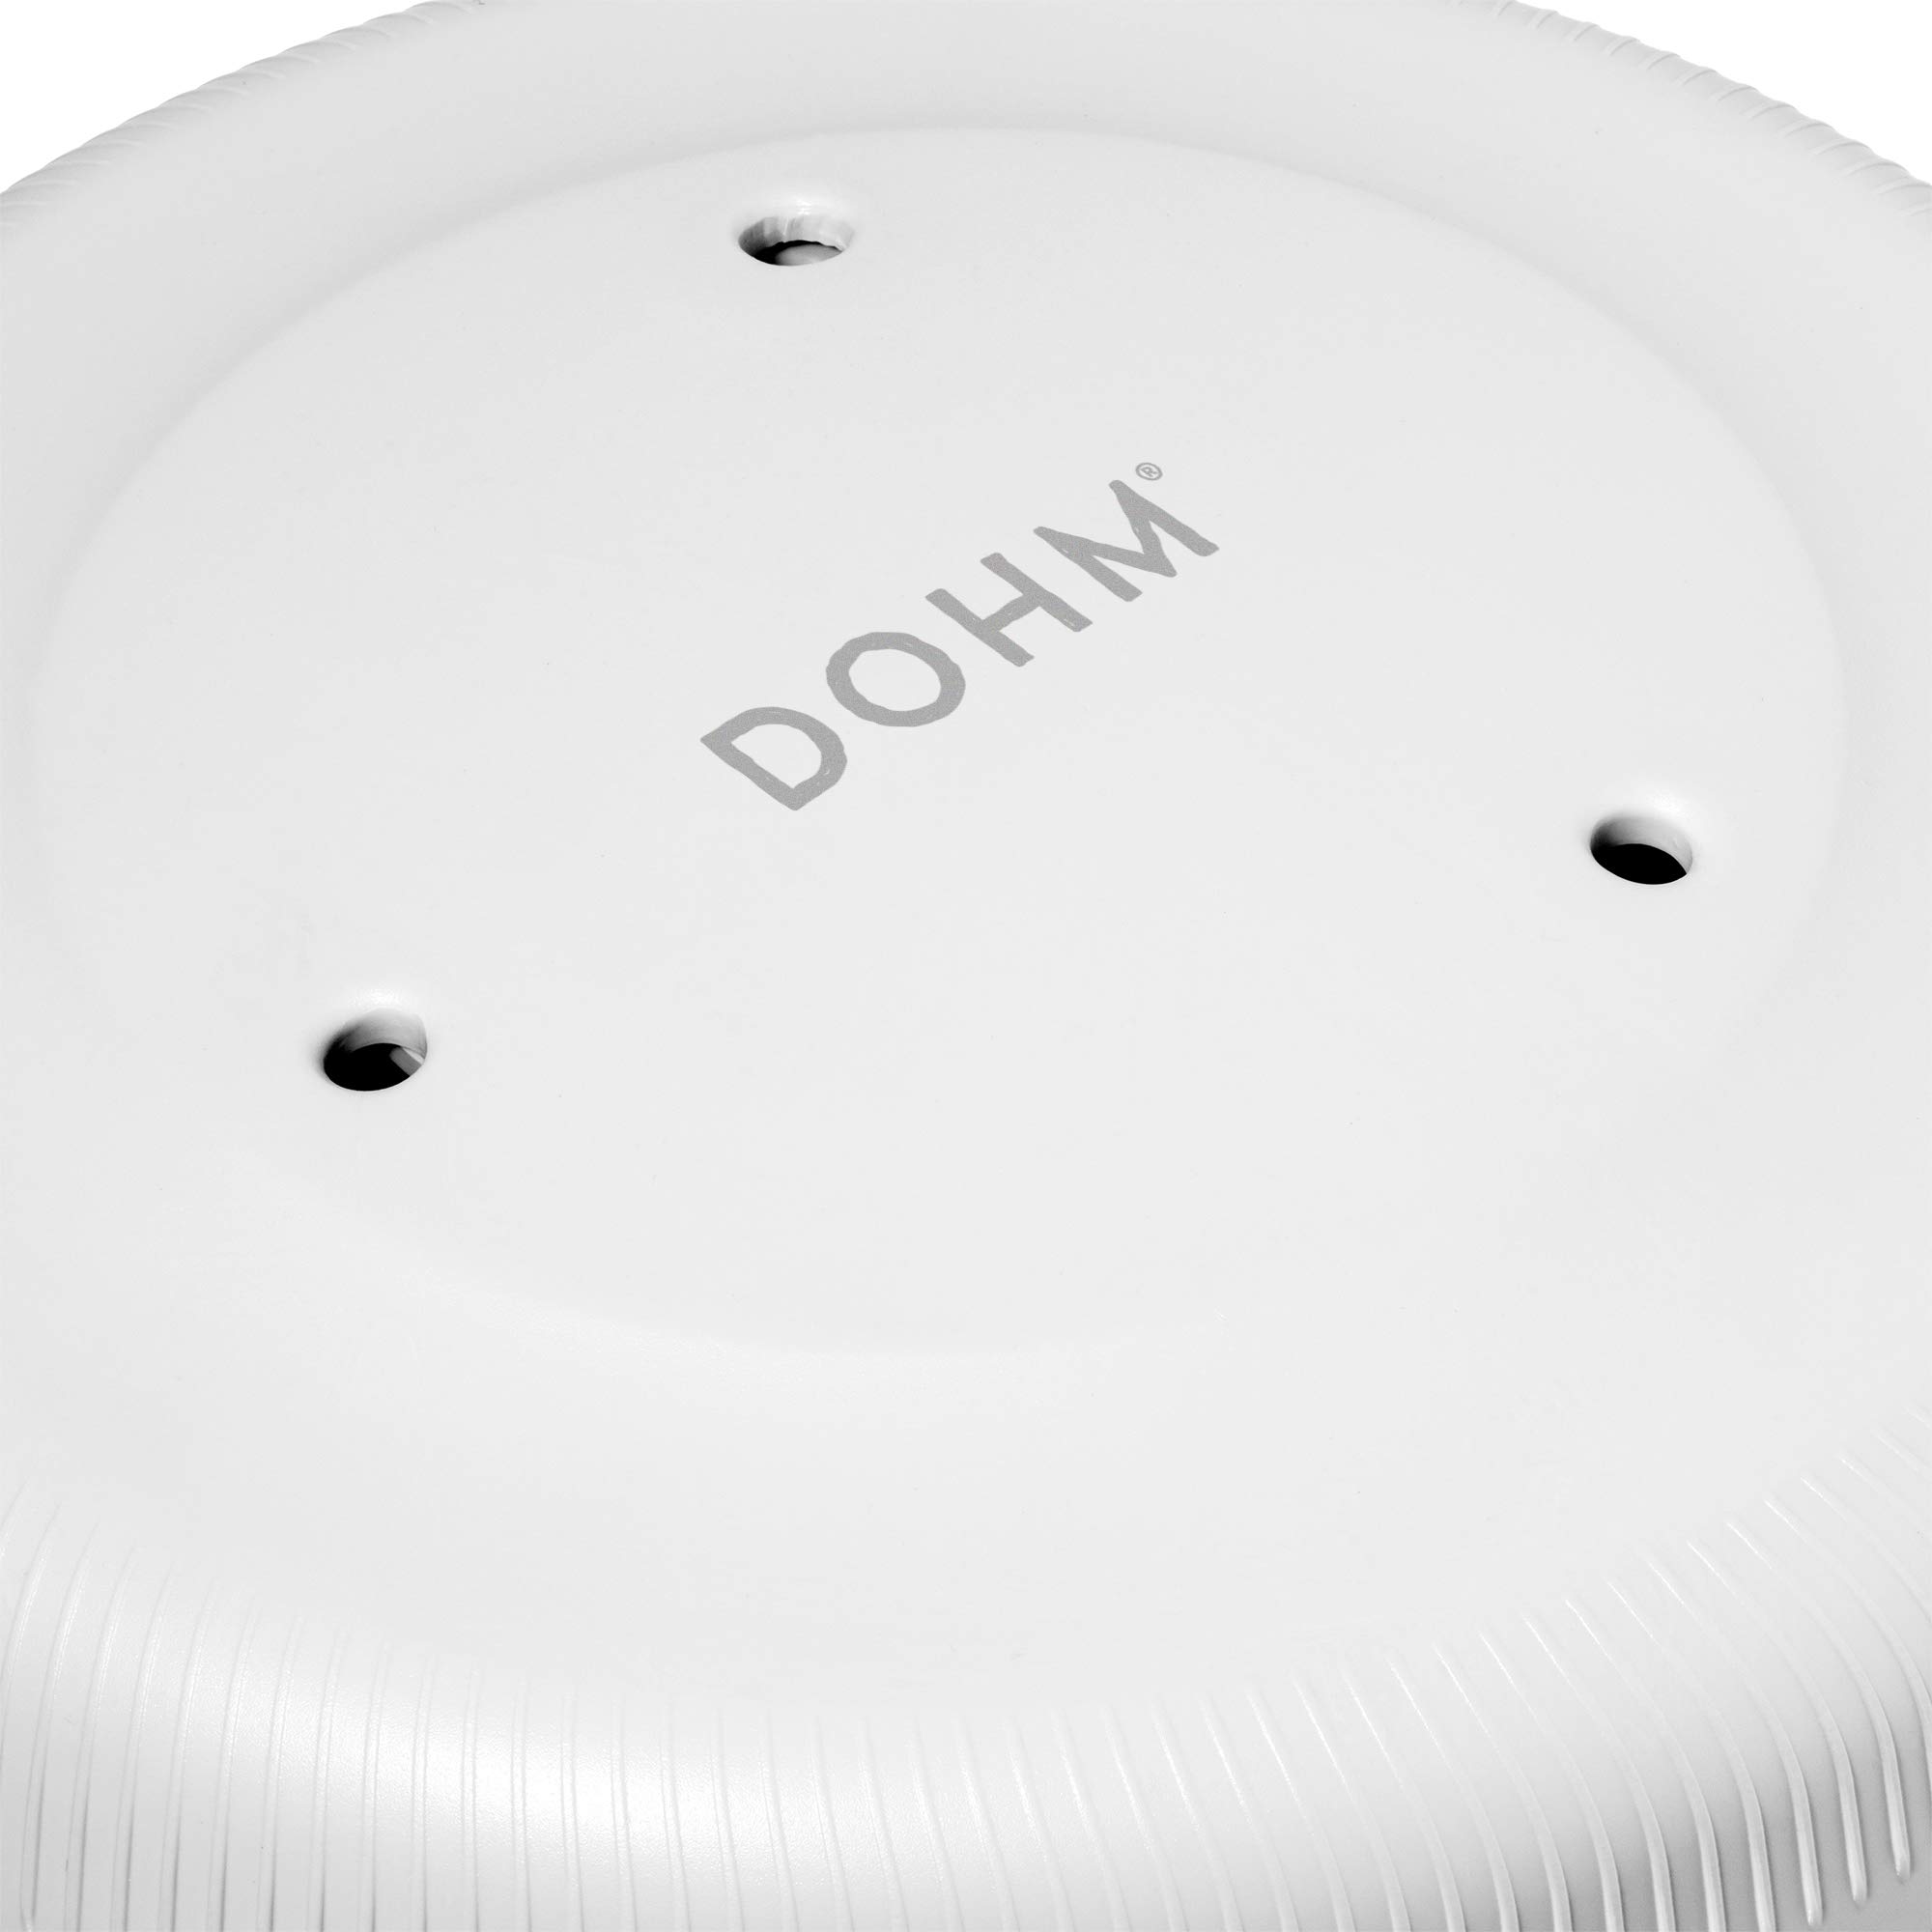 Yogasleep Dohm UNO White Noise Machine with Real Fan Inside, Adjustable Tone, Non-Looping Sound, Sleep Aid & Noise Canceling For Adults & Baby, Office Privacy, Registry Gift, Travel & Home Essential